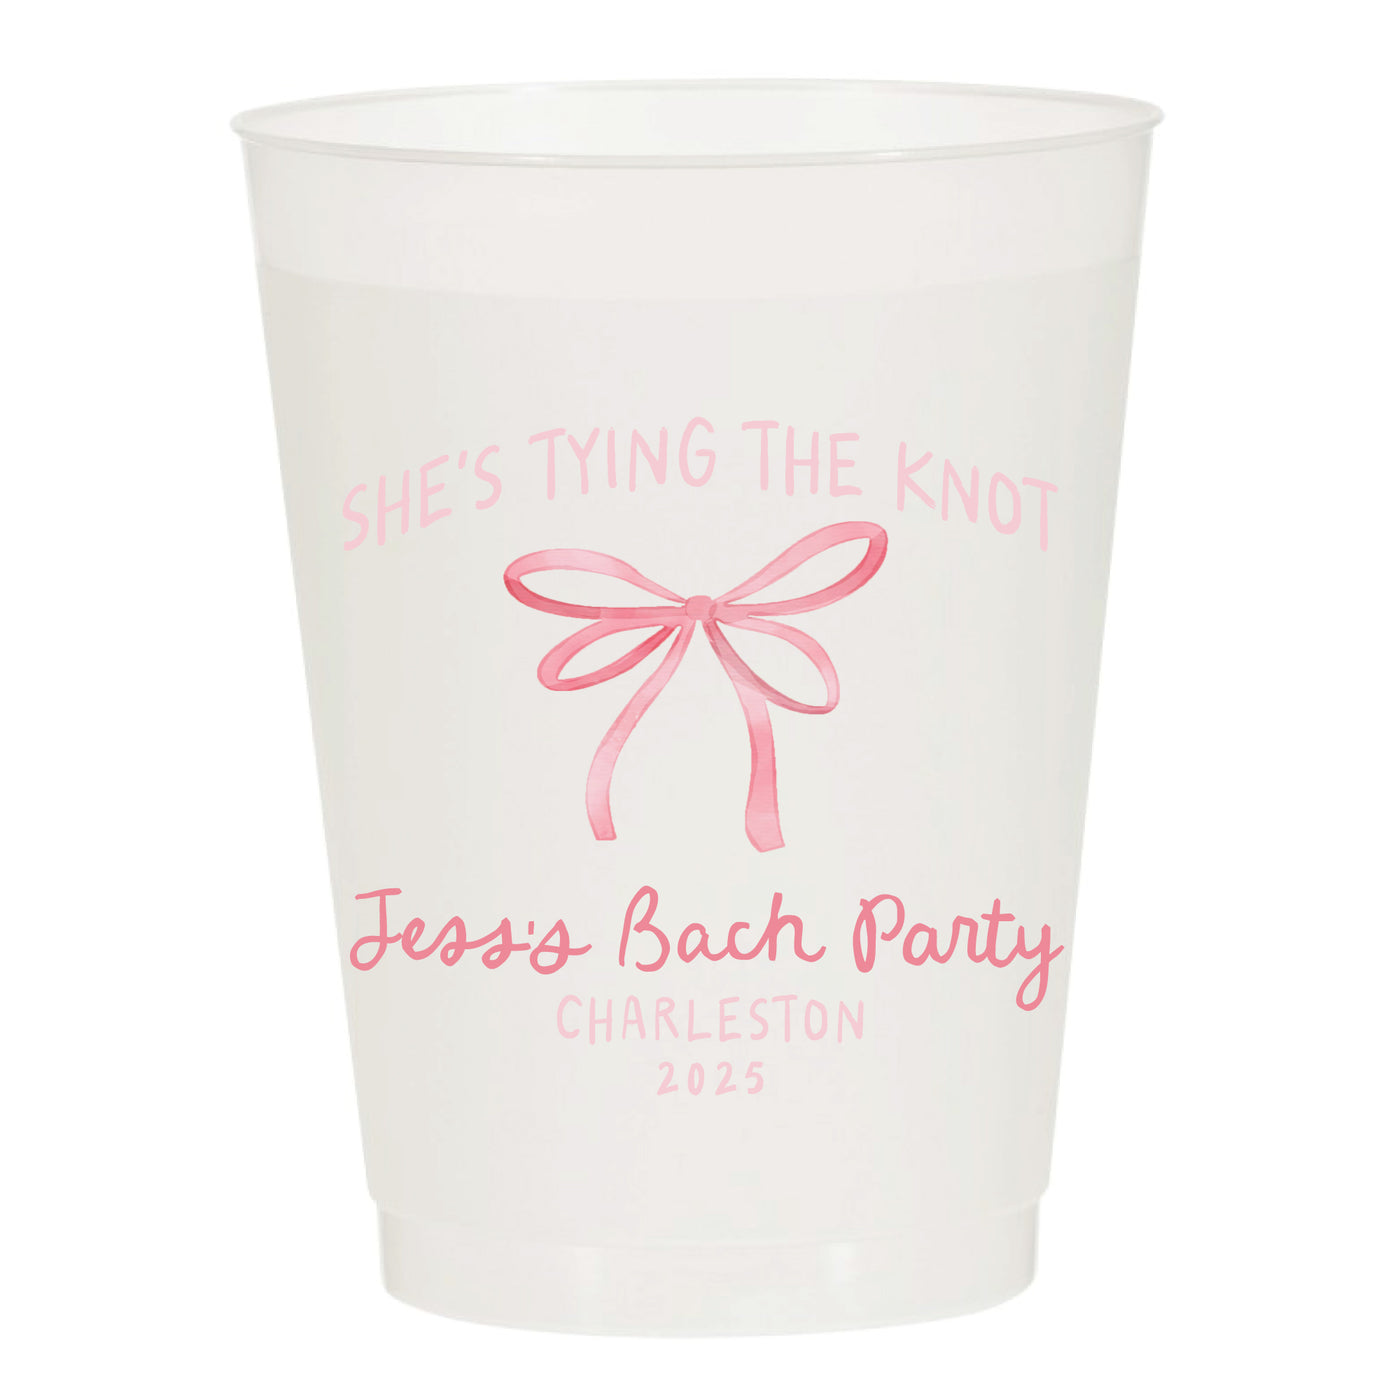 She's Tying The Knot Watercolor Bow Bachelorette Frosted Full Color Printed Shatterproof Cups